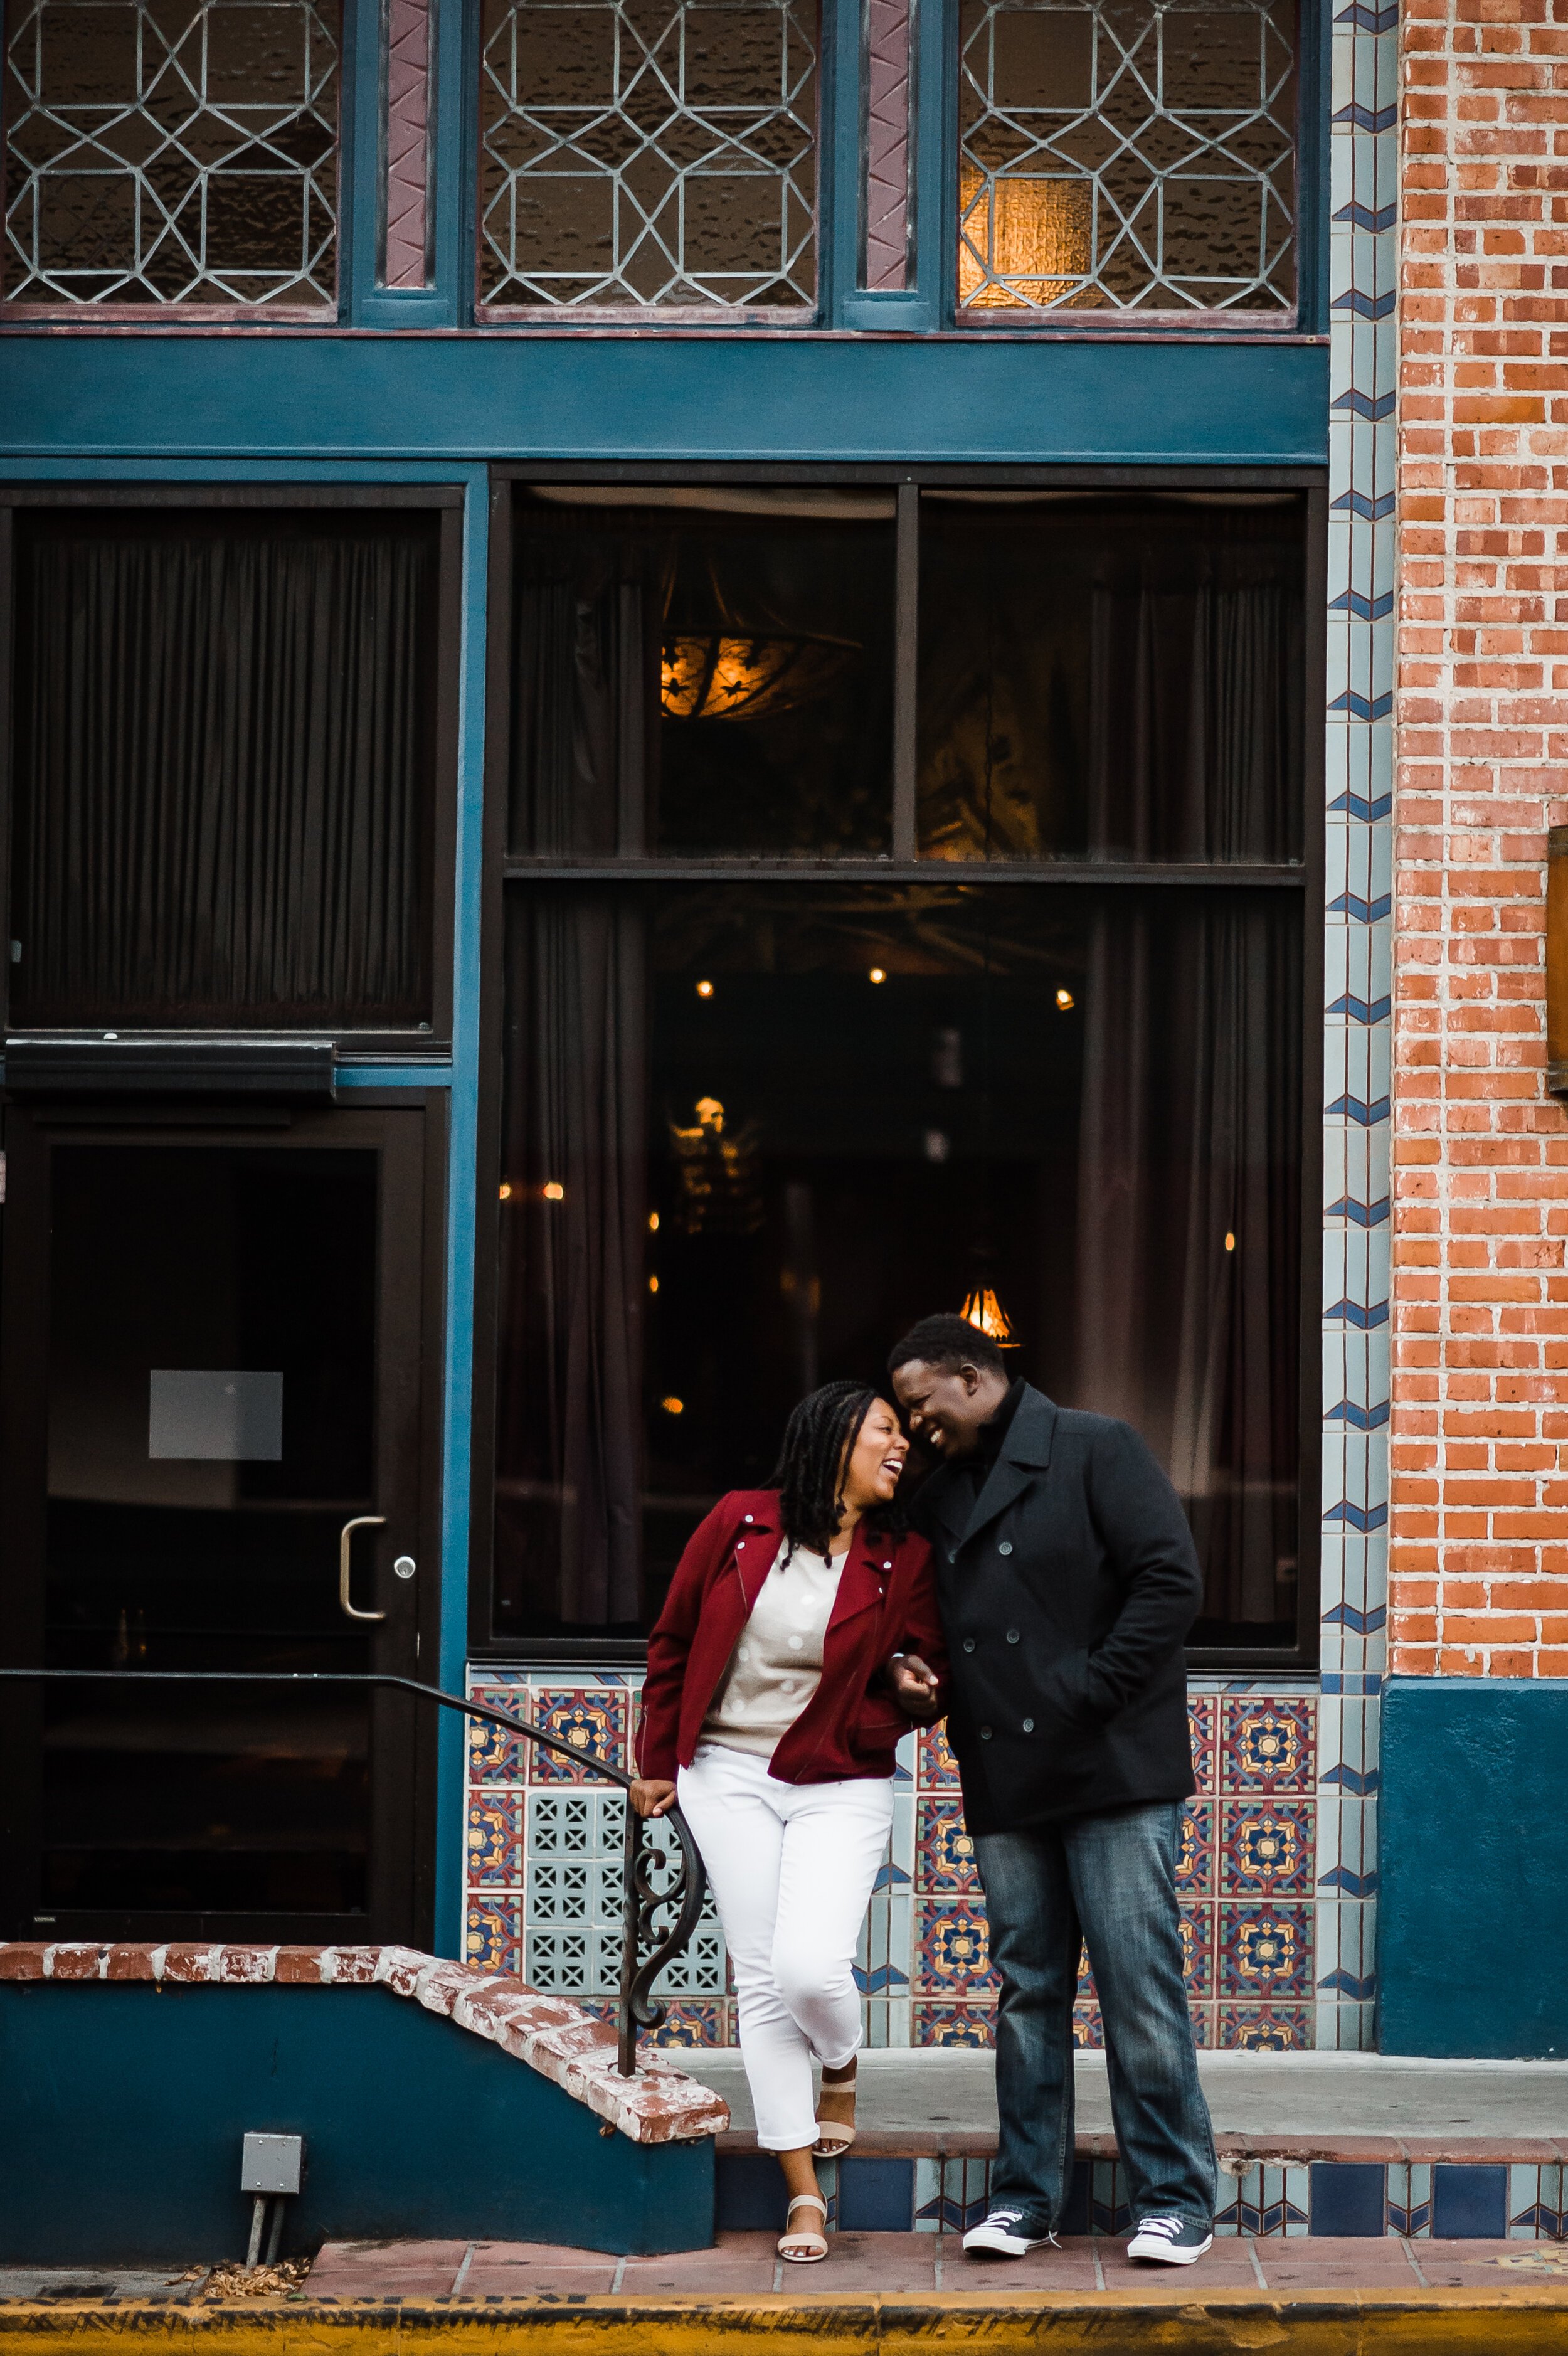 www.santabarbarawedding.com | Michelle Ramirez Photography | Couple Standing in Front of Colorful Building During Engagement Shoot in Downtown Ventura